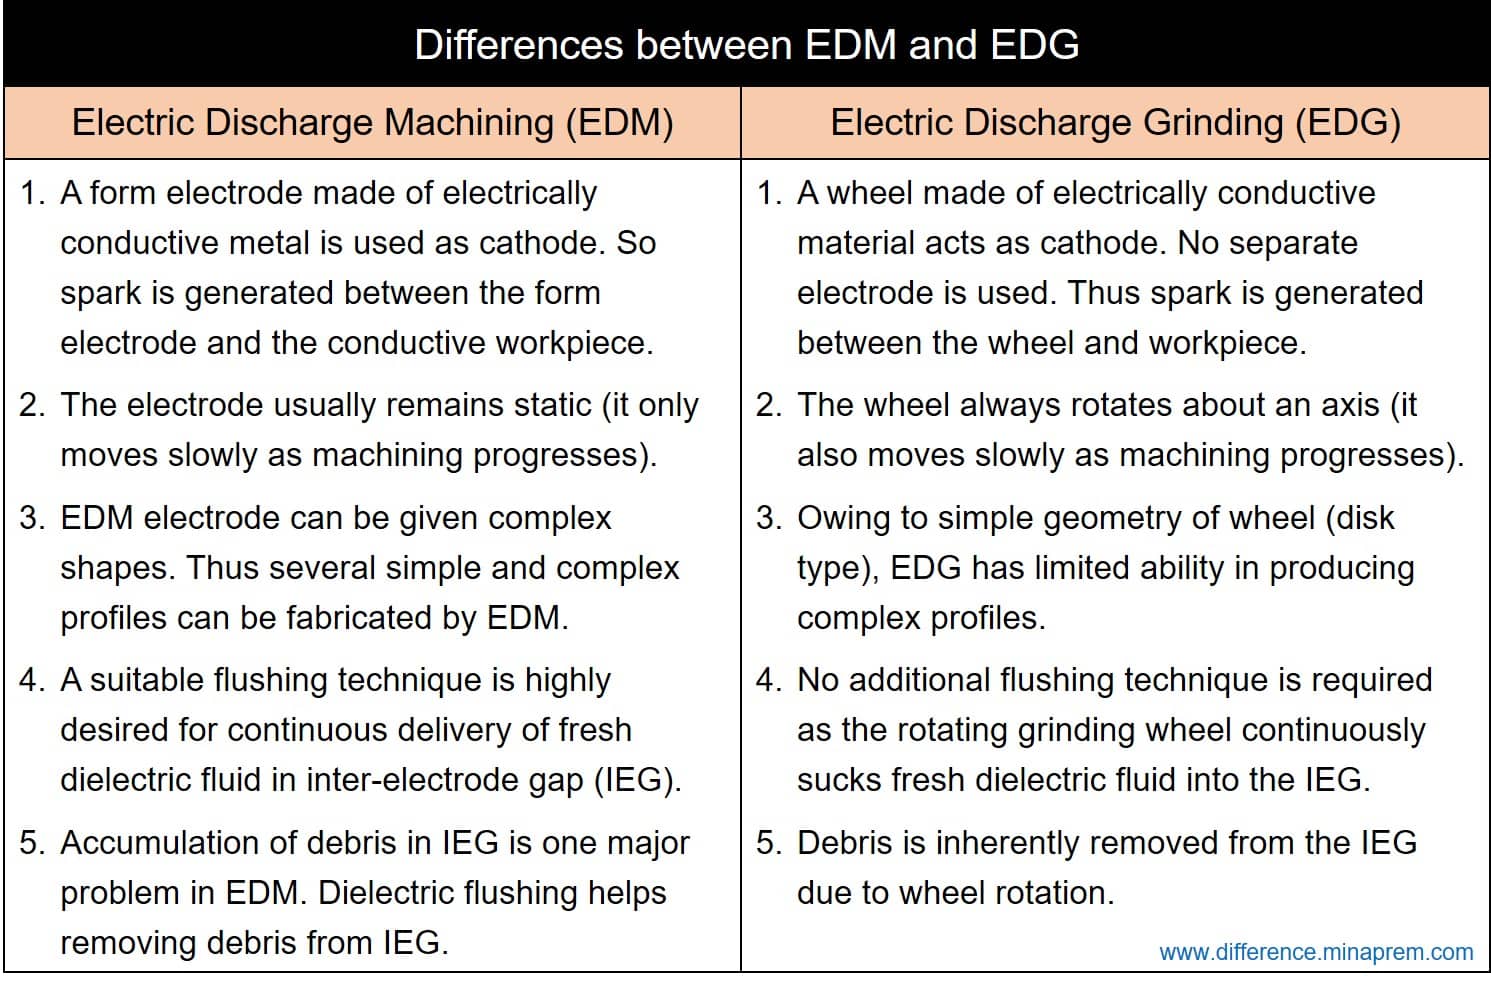 Difference Between EDM and EDG - Electric Discharge Machining & Grinding